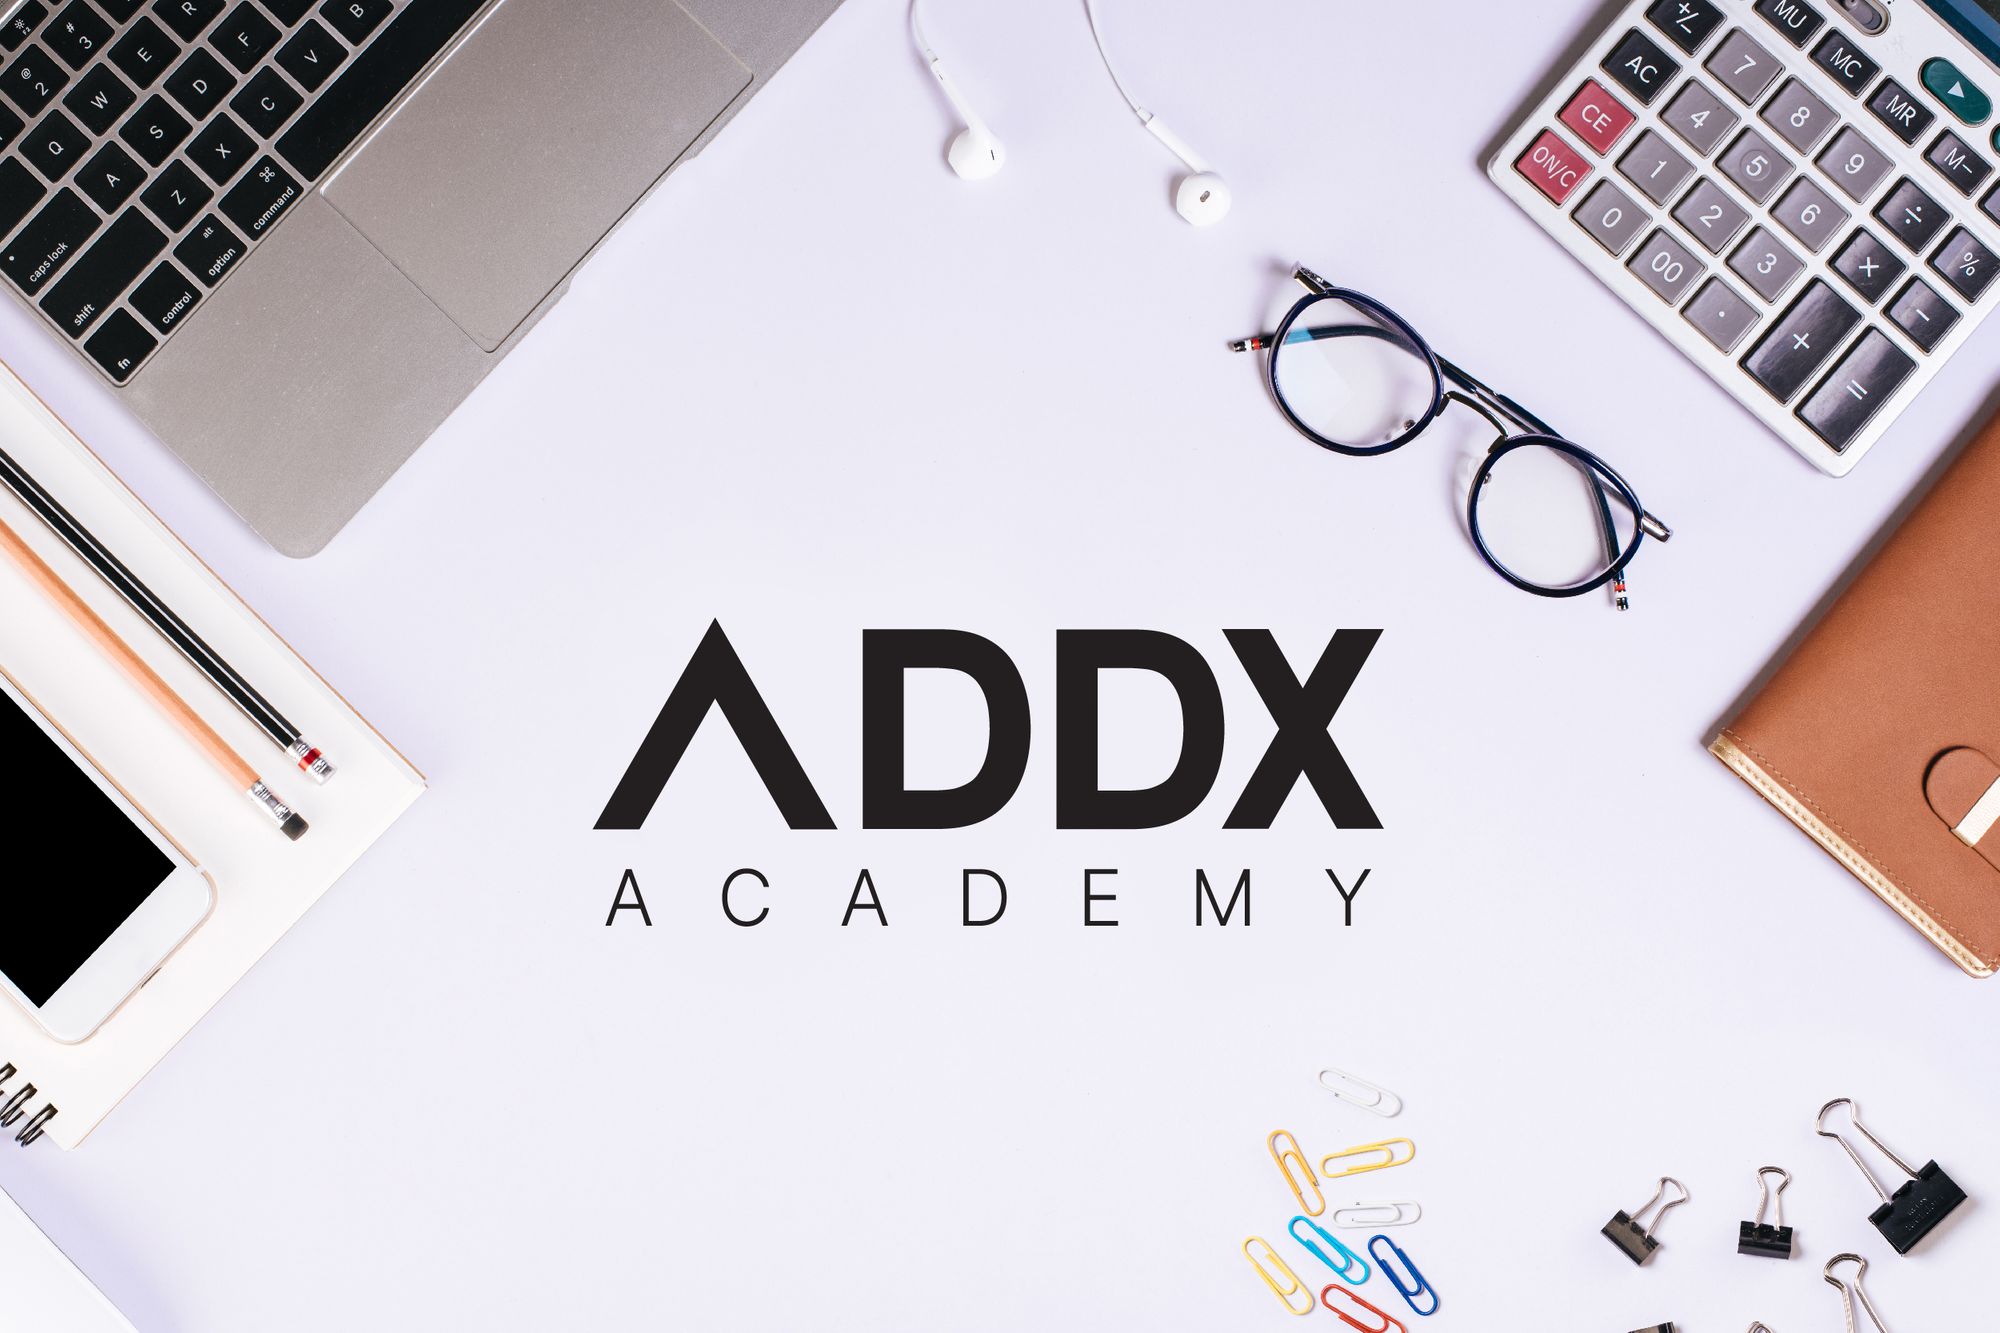 ADDX Academy: What Is Private Debt?